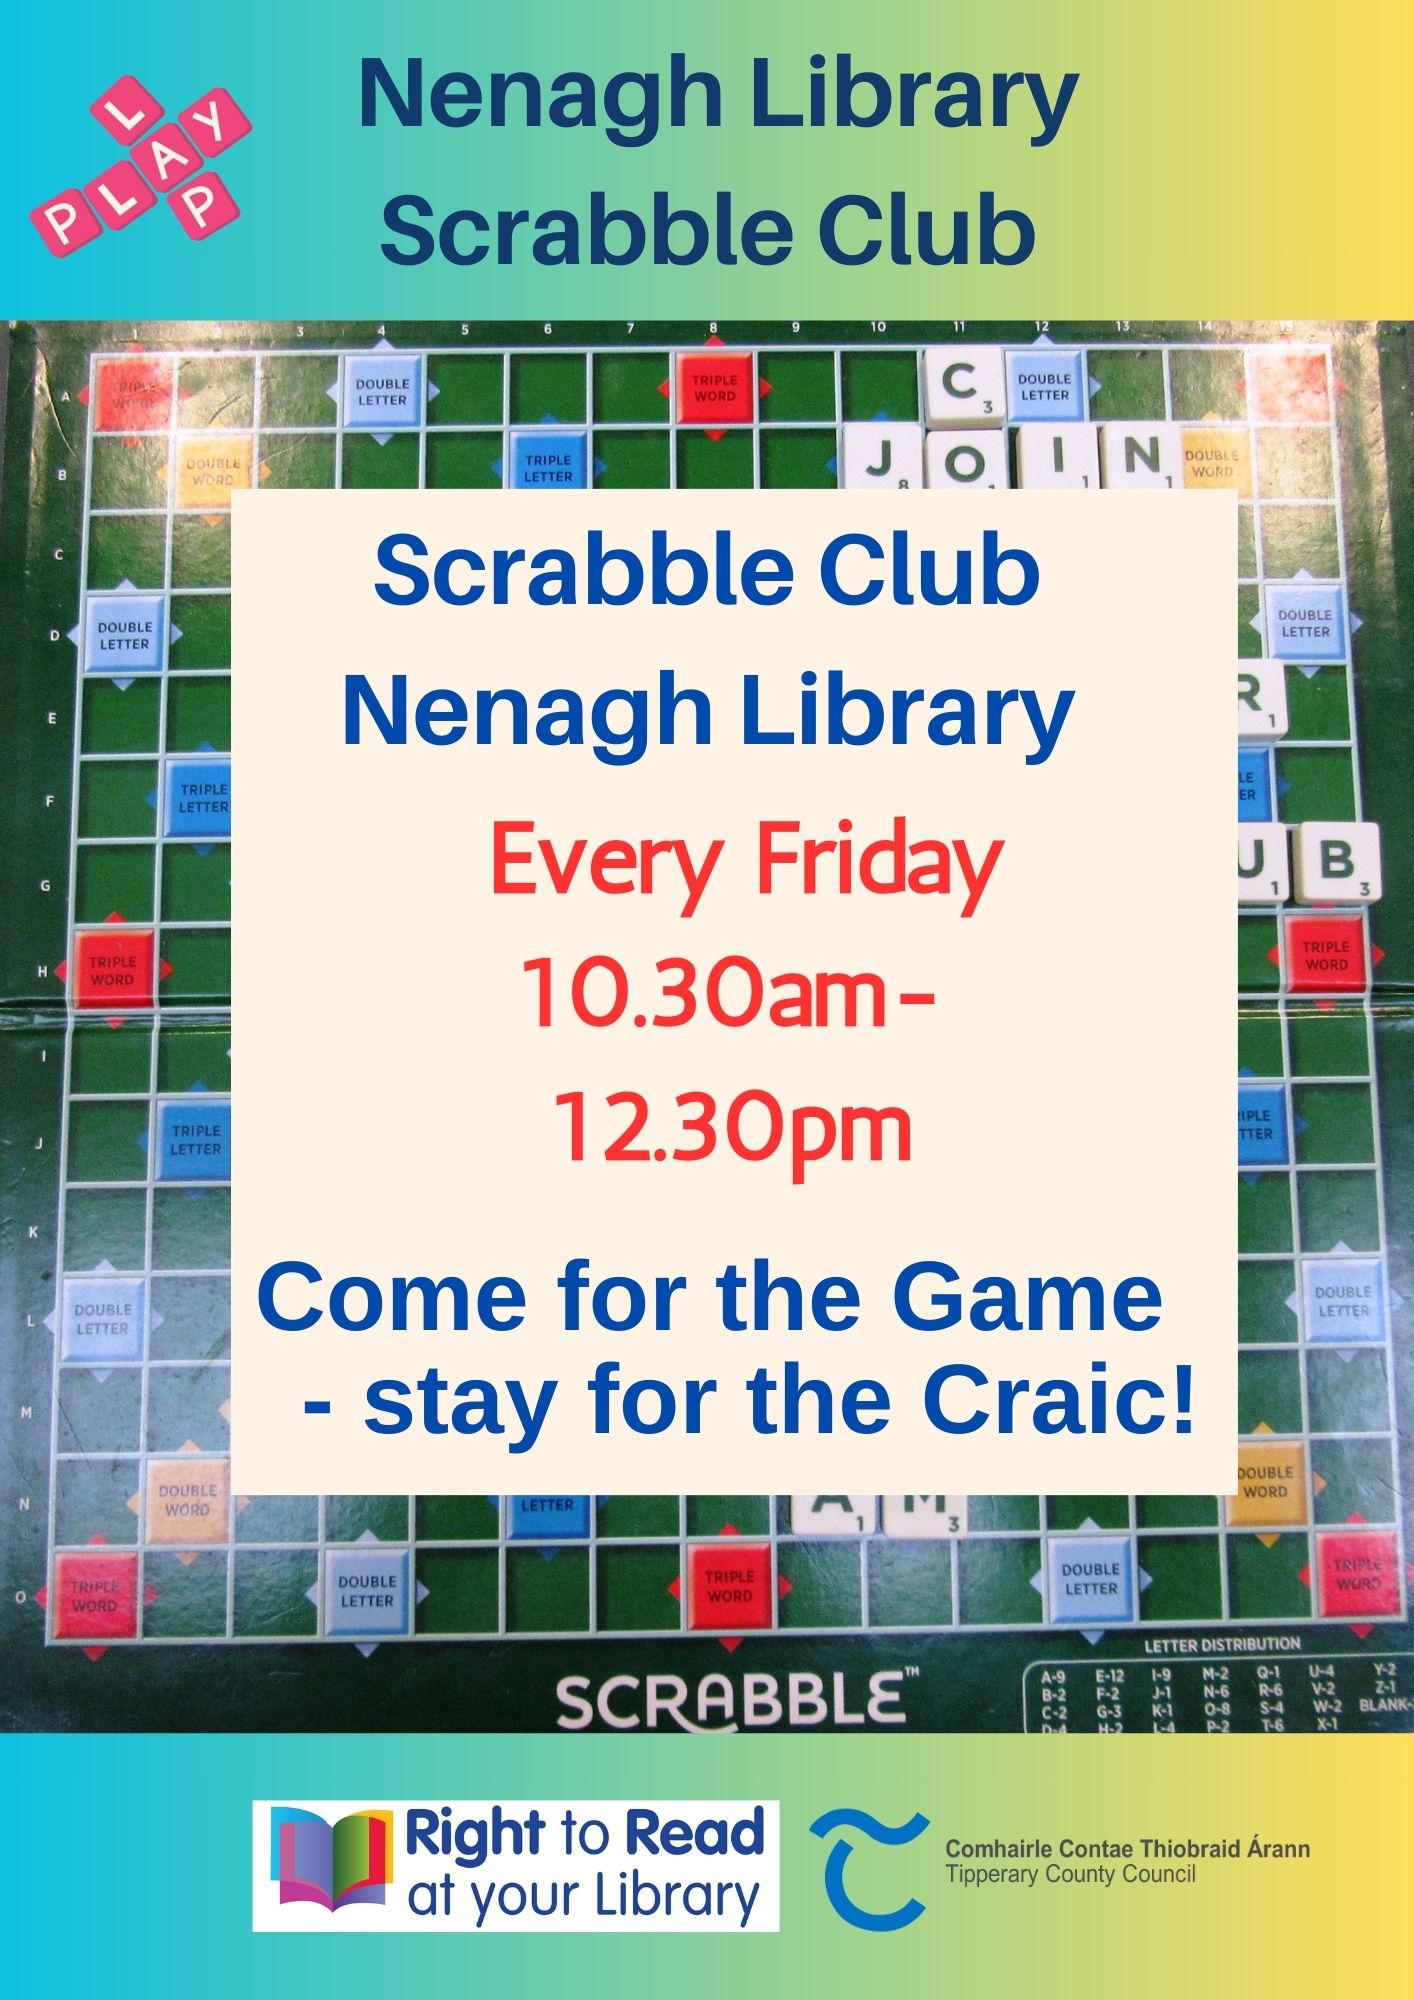 Nenagh Library Scrabble Club meet every Friday morning in Nenagh Library from 10.30am to 12.30am.